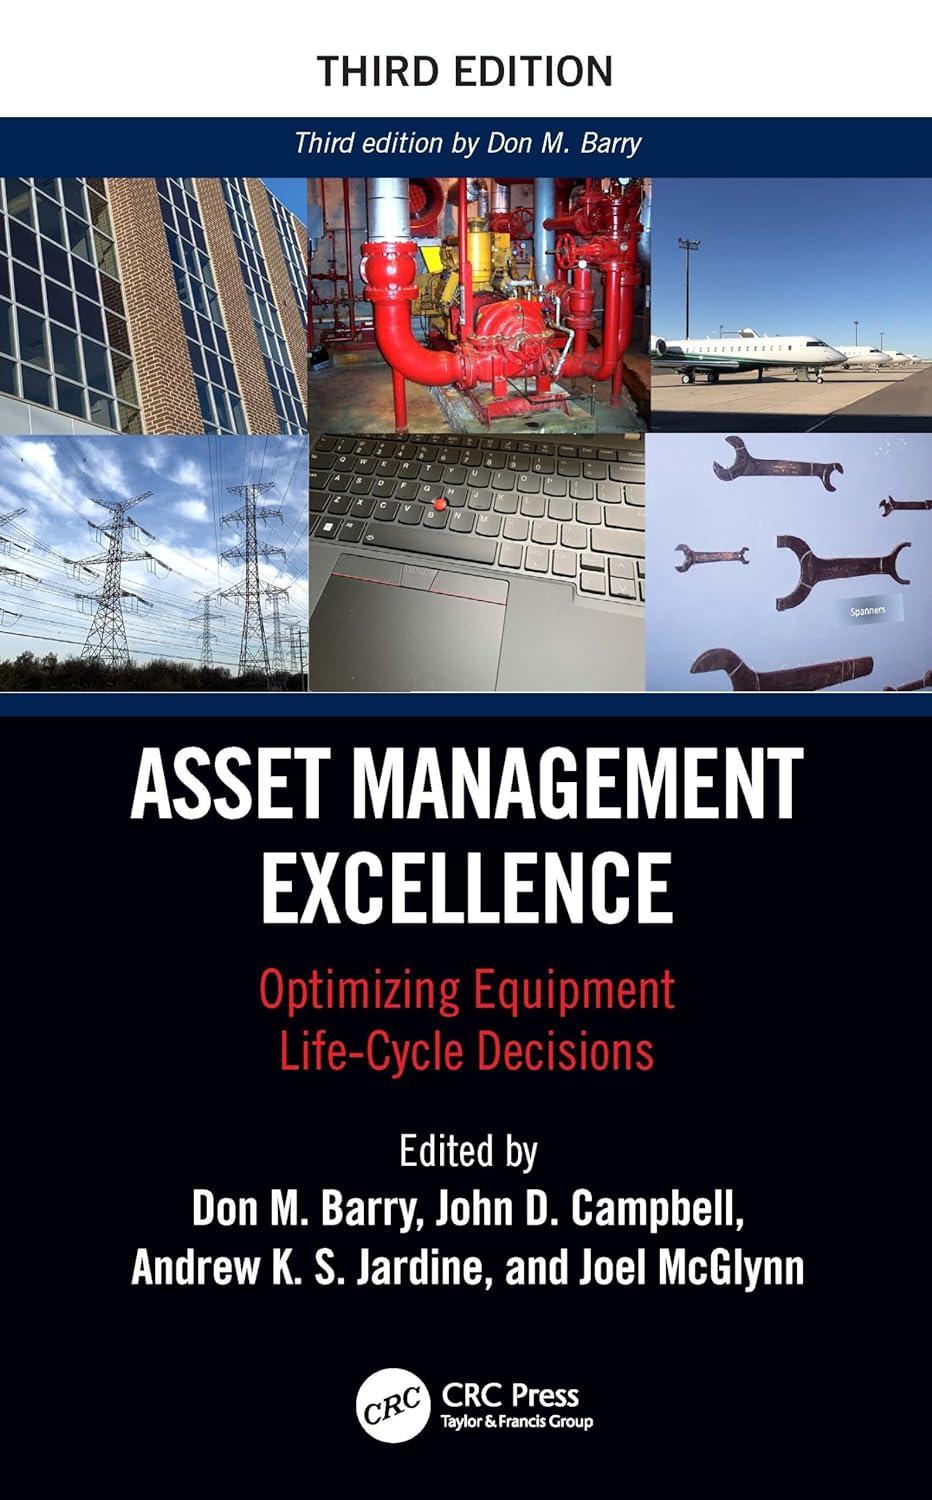 asset management excellence optimizing equipment life-cycle decisions mechanical engineering 3rd edition don